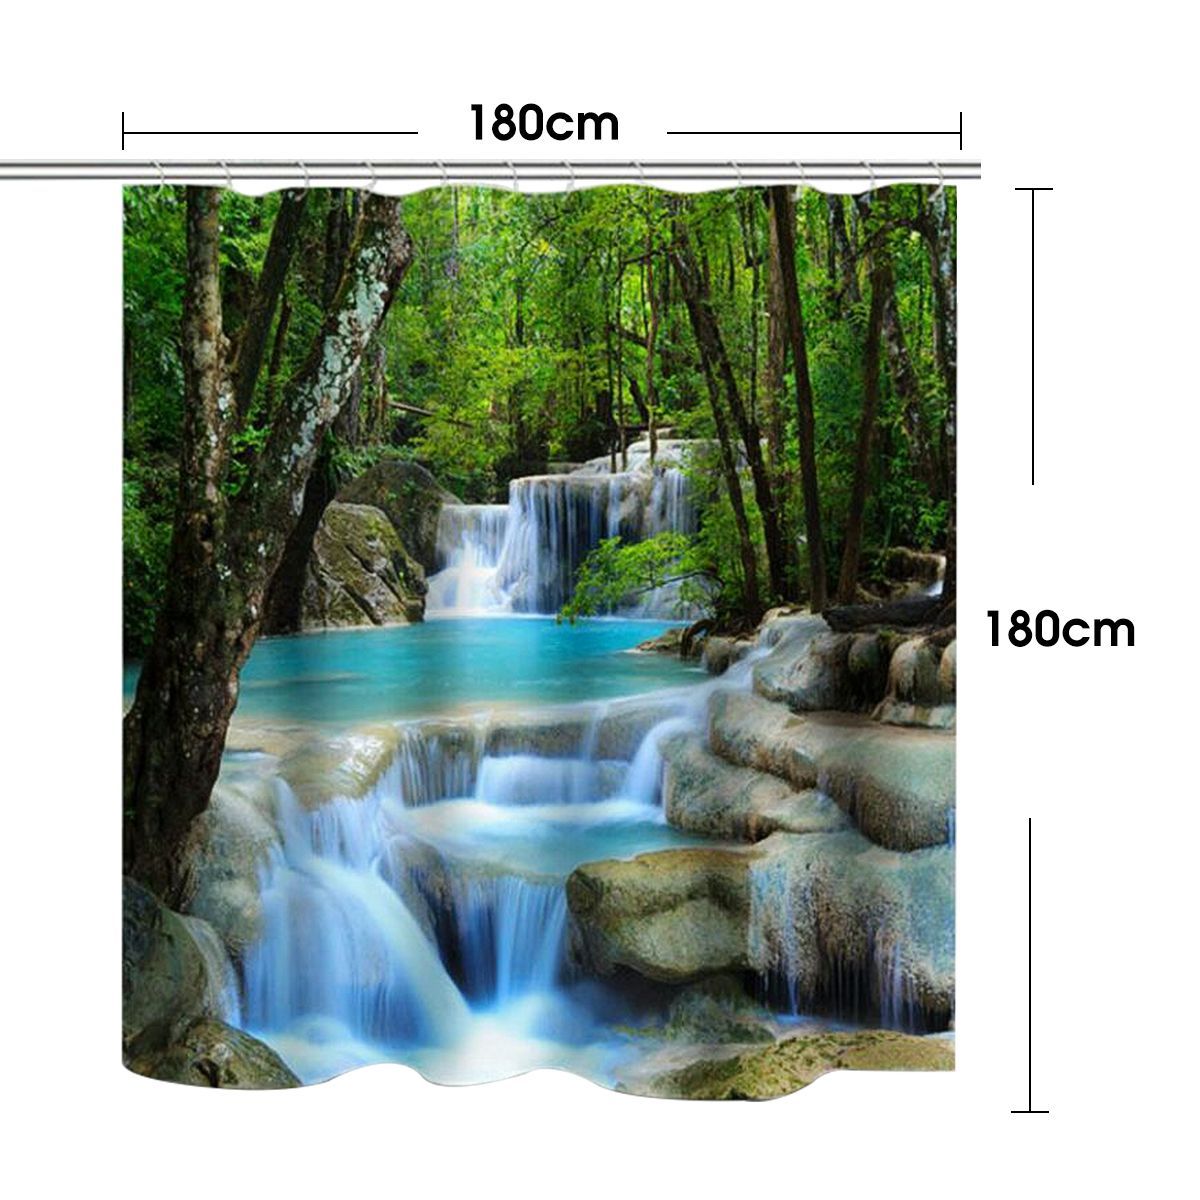 3D-Waterfall-Nature-Scenery-Bath-Shower-Curtain-Water-Resistant-Bathroom-Shield-1452770